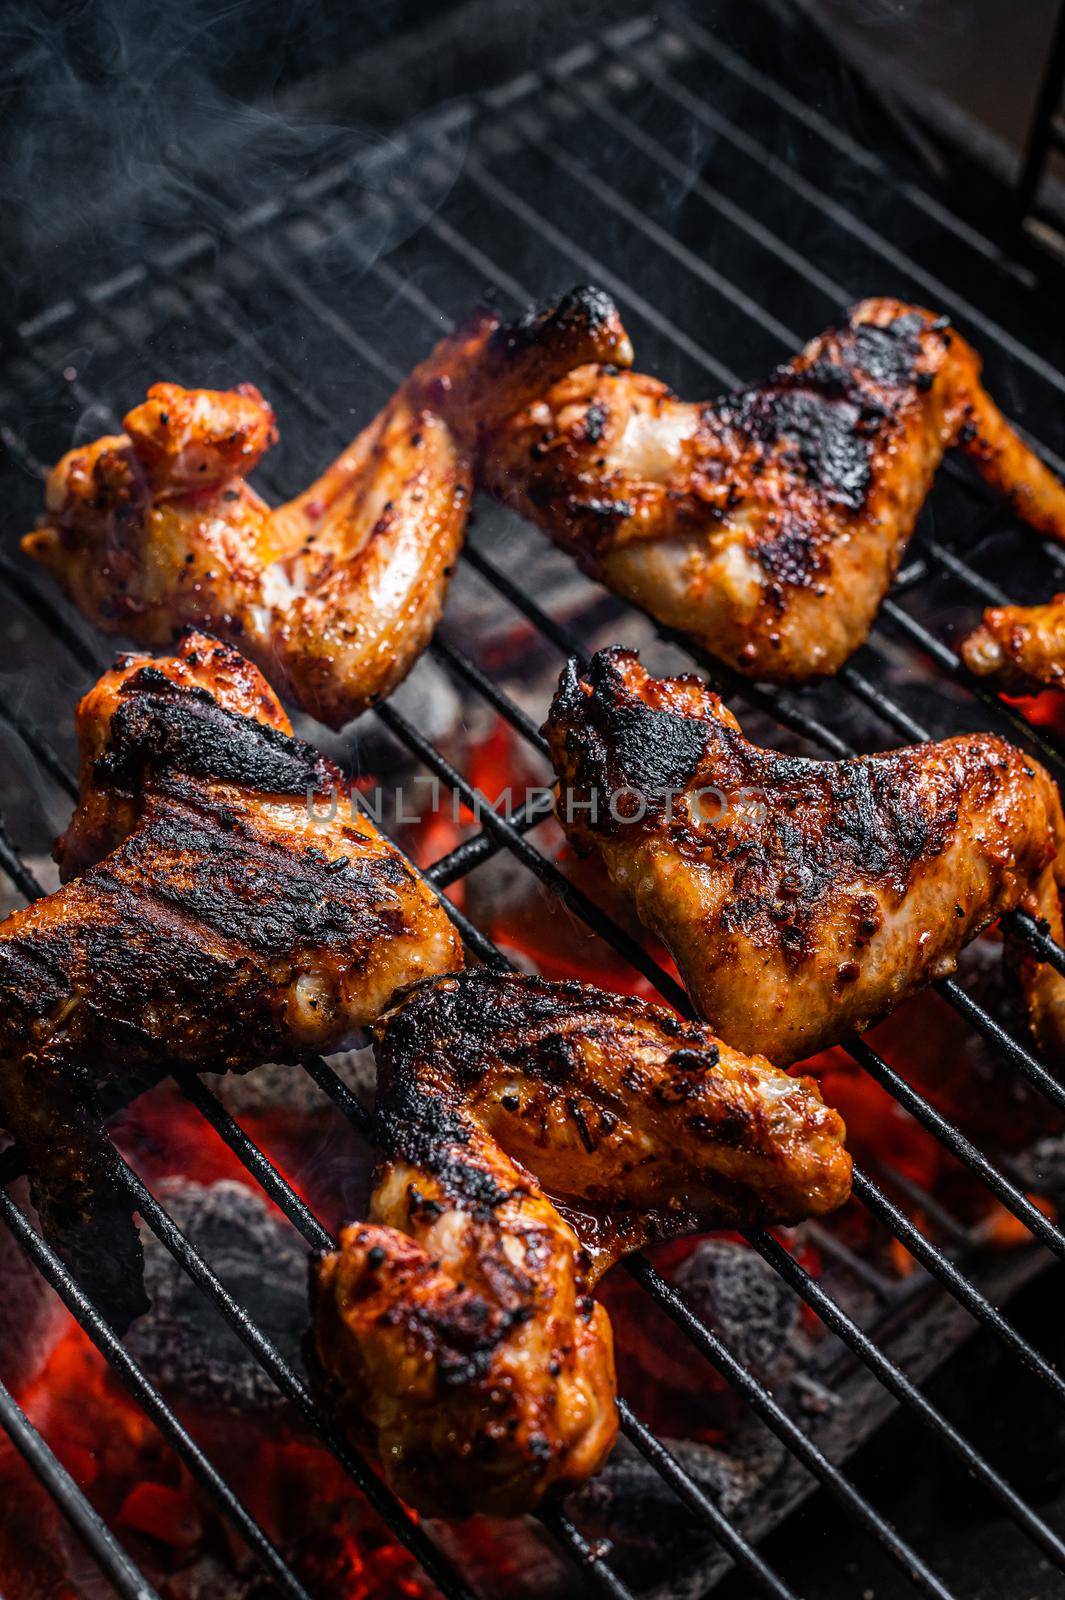 Chicken wings on barbecue, outdoor BBQ grill with fire. Top view by Composter